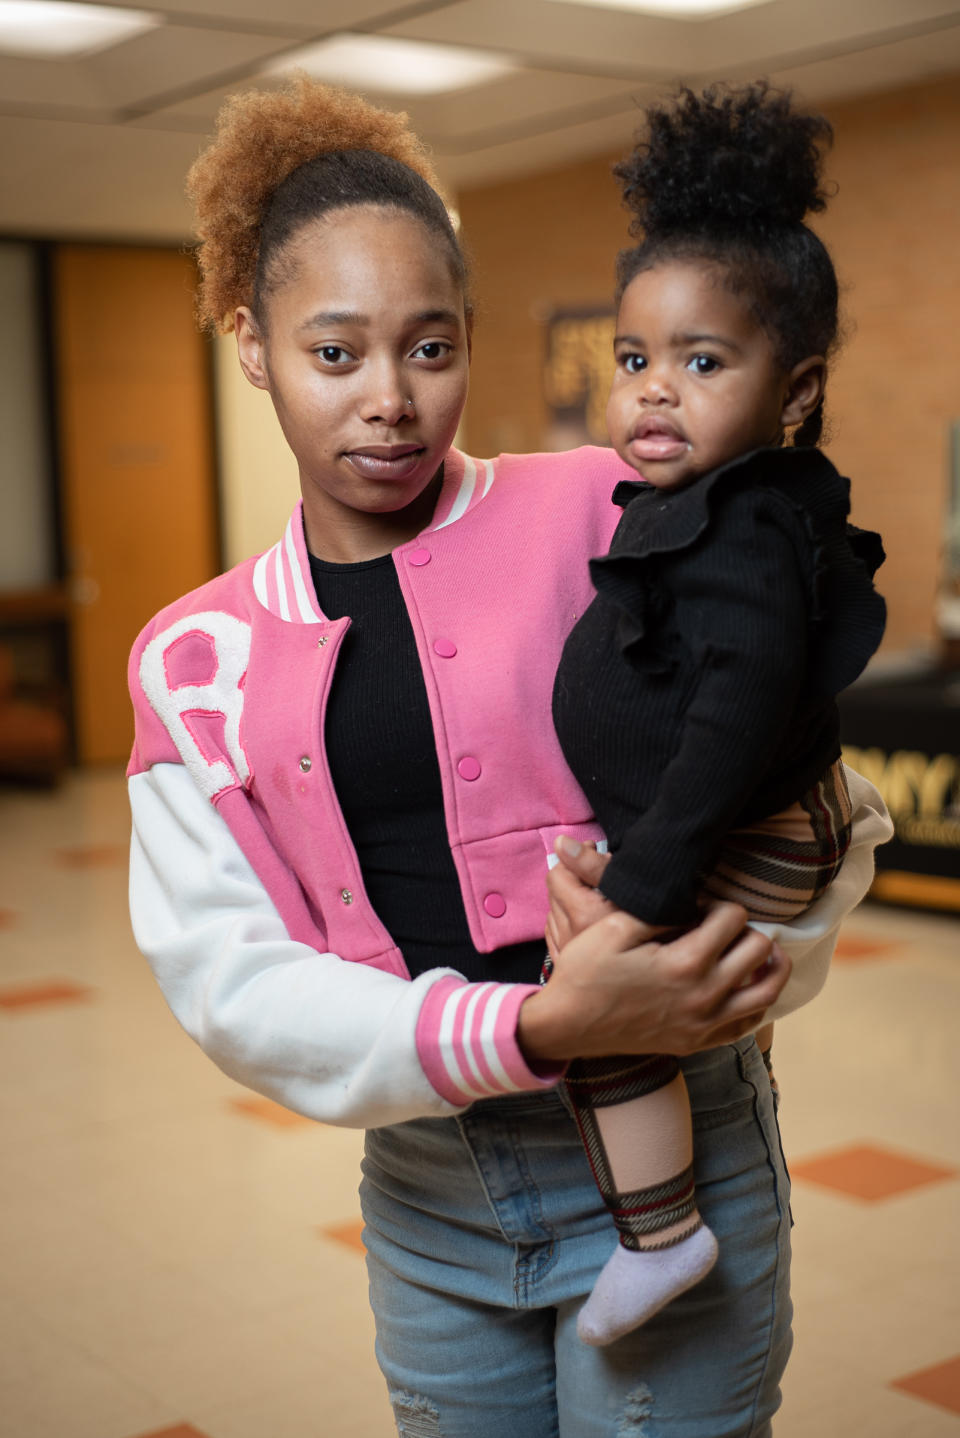 Kayla Wheeler with her daughter, Chase at Mississippi Valley State University in Itta Bena, Miss., on Nov. 16, 2022. (Timothy Ivy for NBC News)